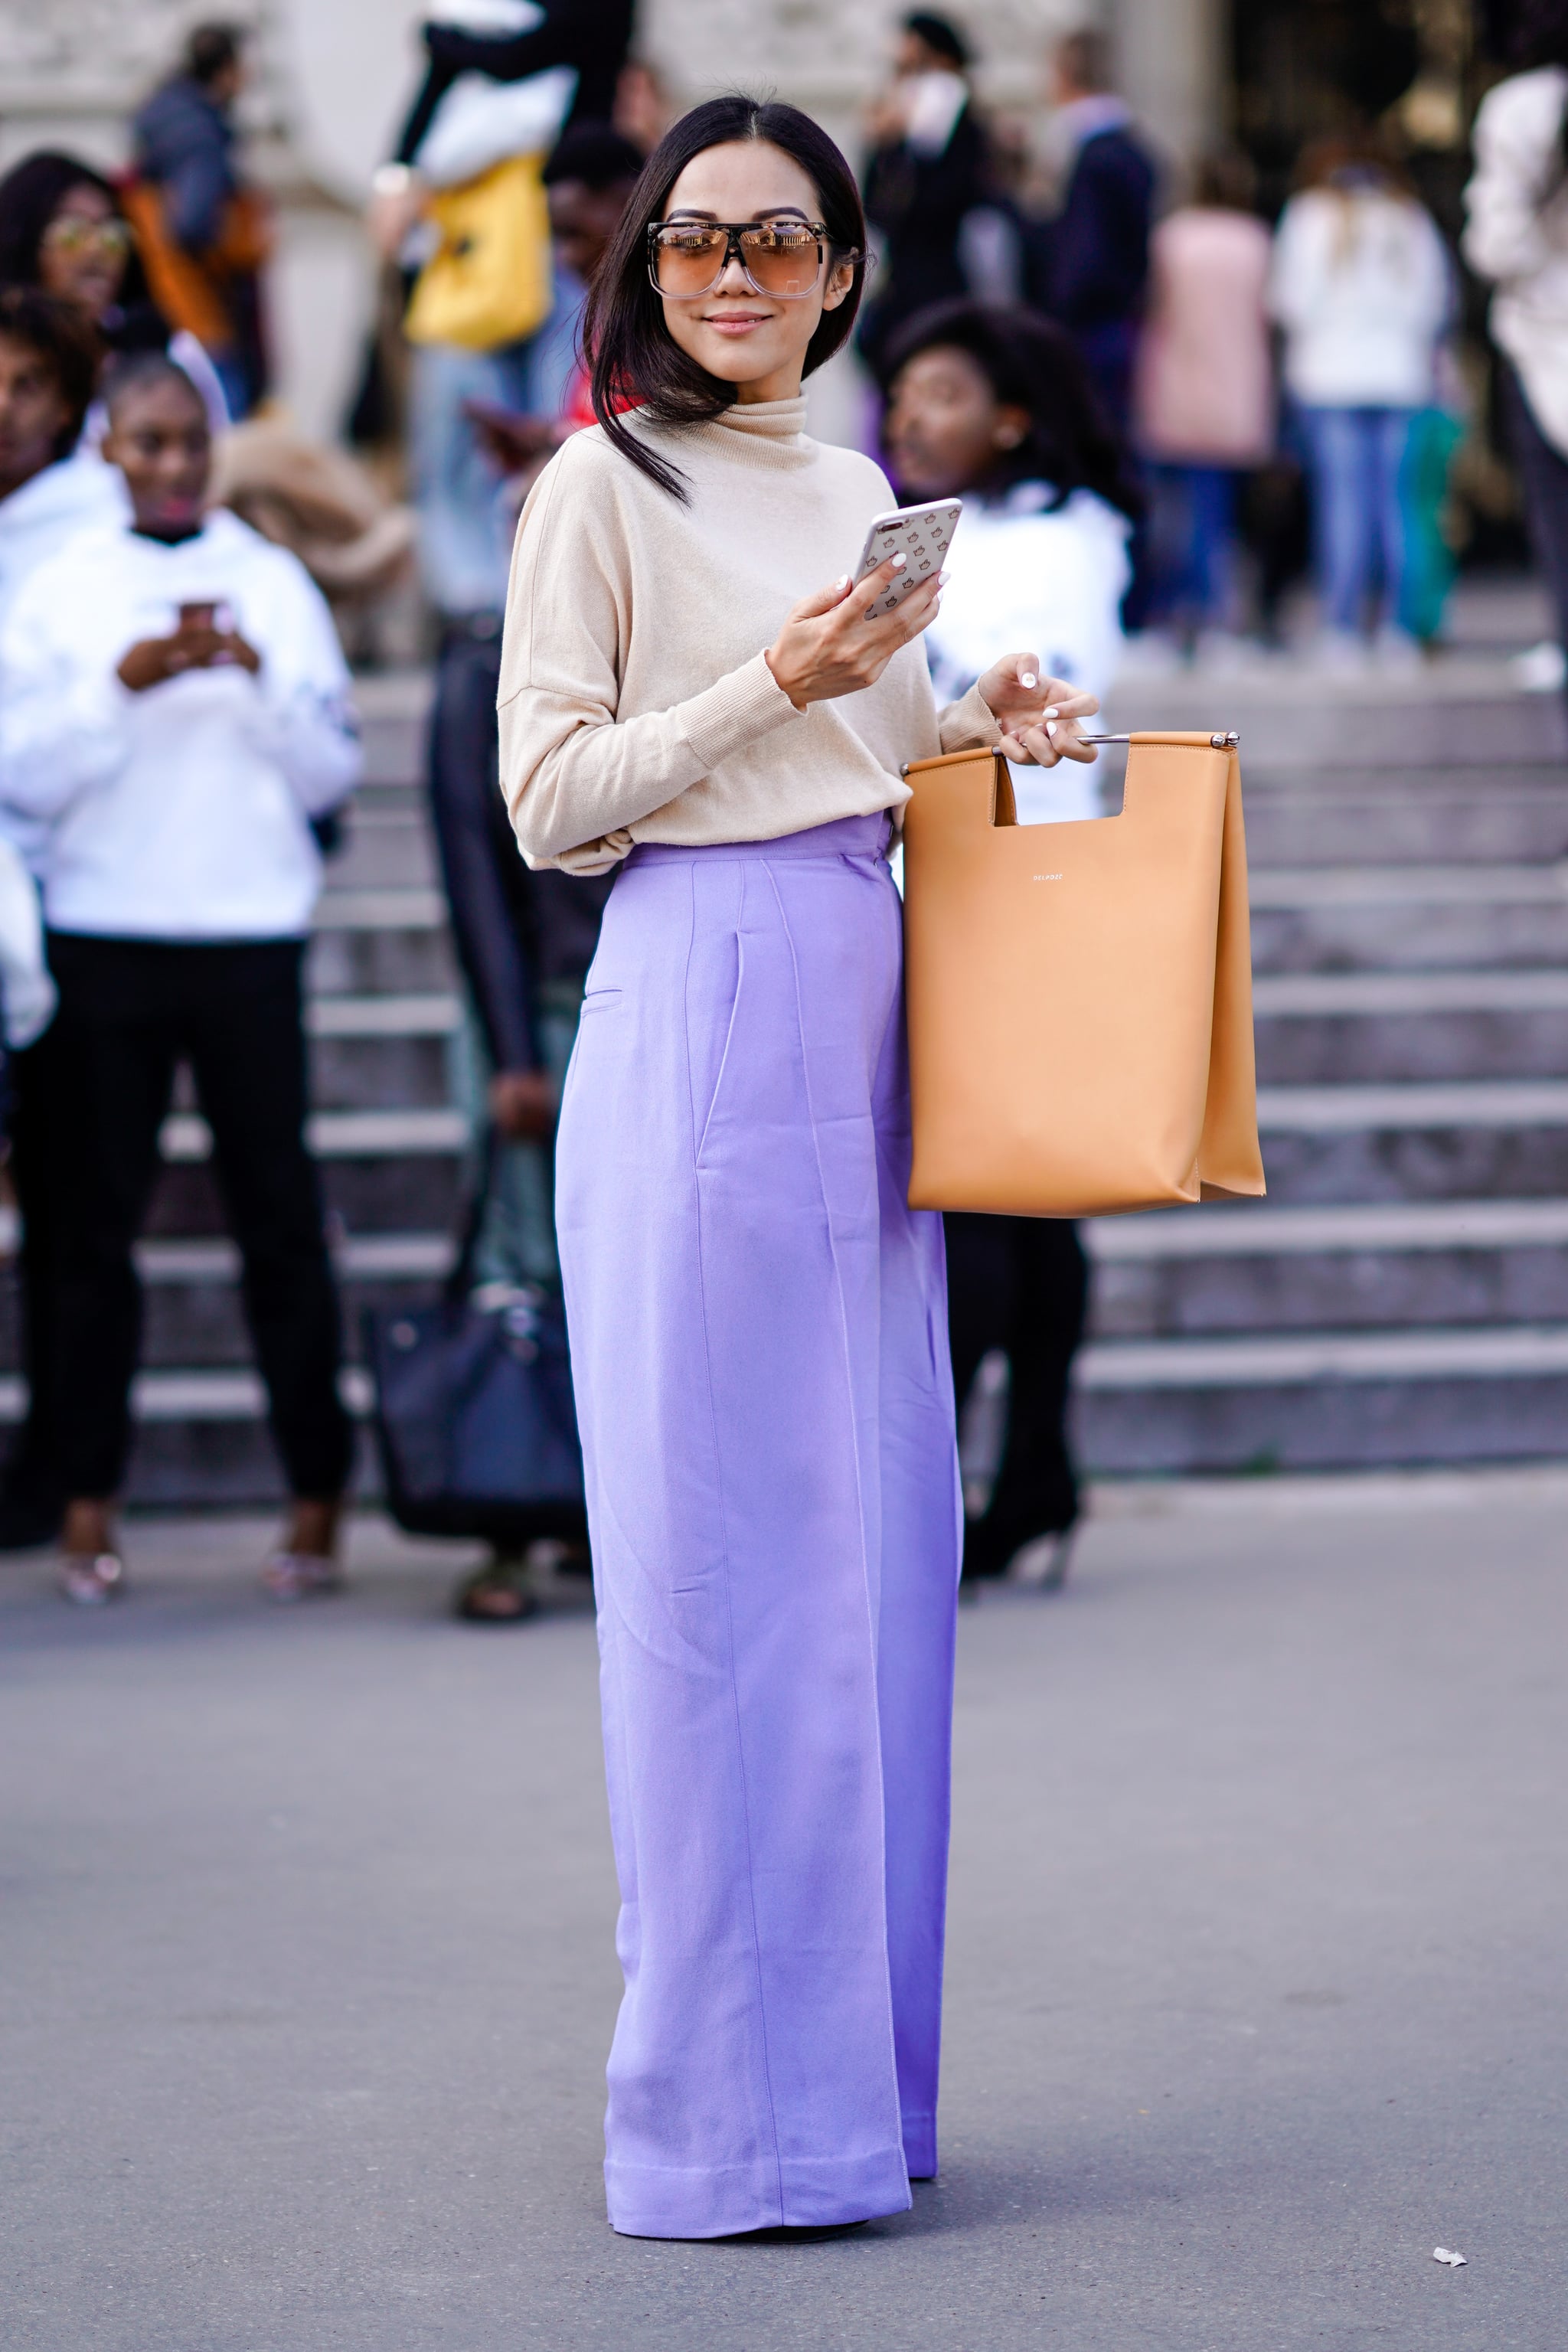 Make a Big Style Statement in Lavender Pants — It's the Color of the Year!  | 100 Outfits to Try in 2018 | POPSUGAR Fashion Photo 28